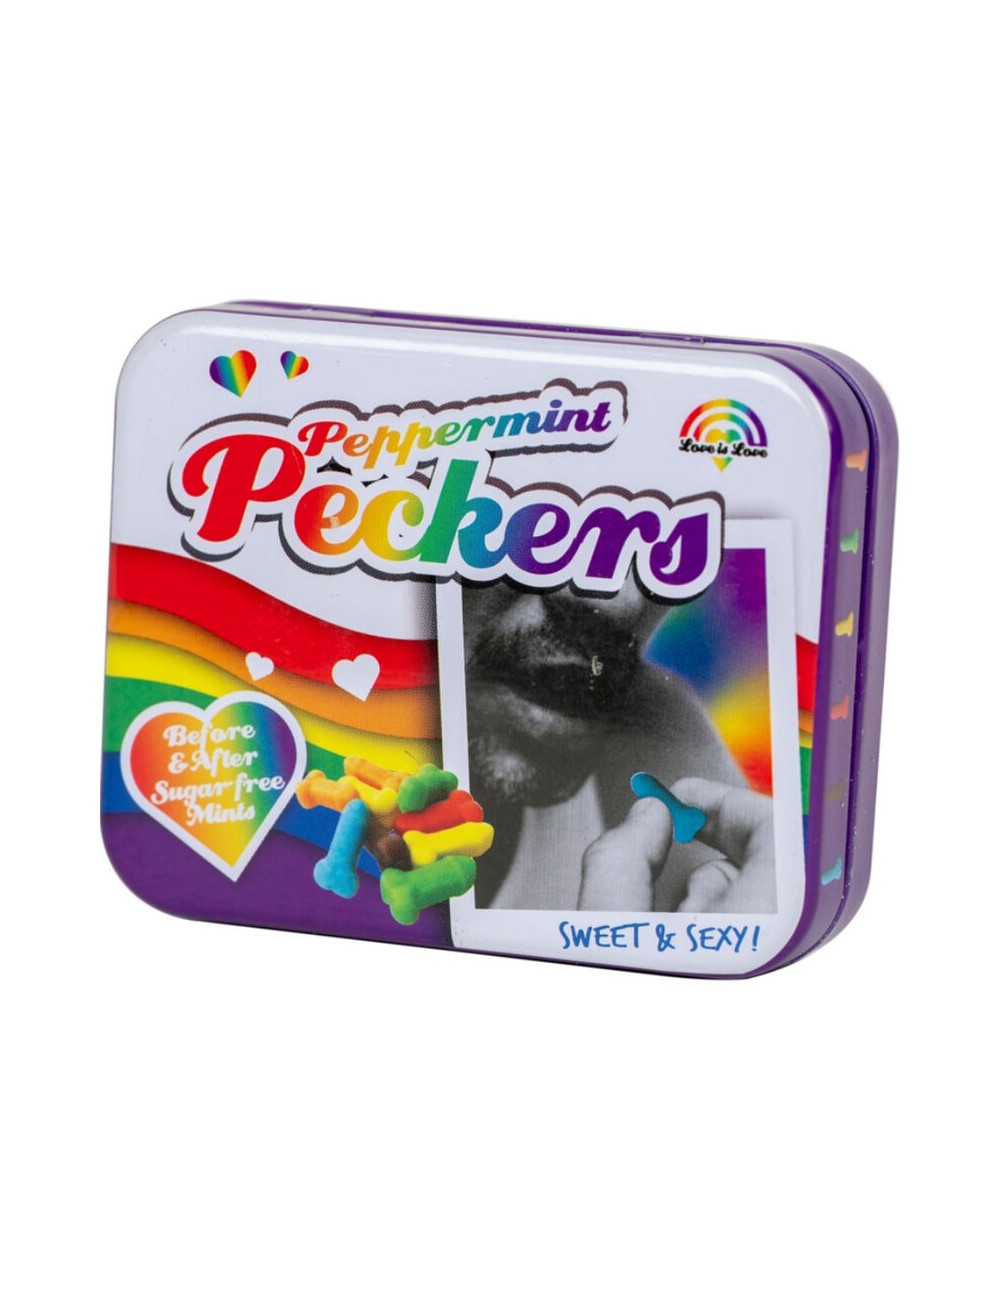 SPENCER & FLEETWOOD - PECKERS MINT RAINBOW CANDY